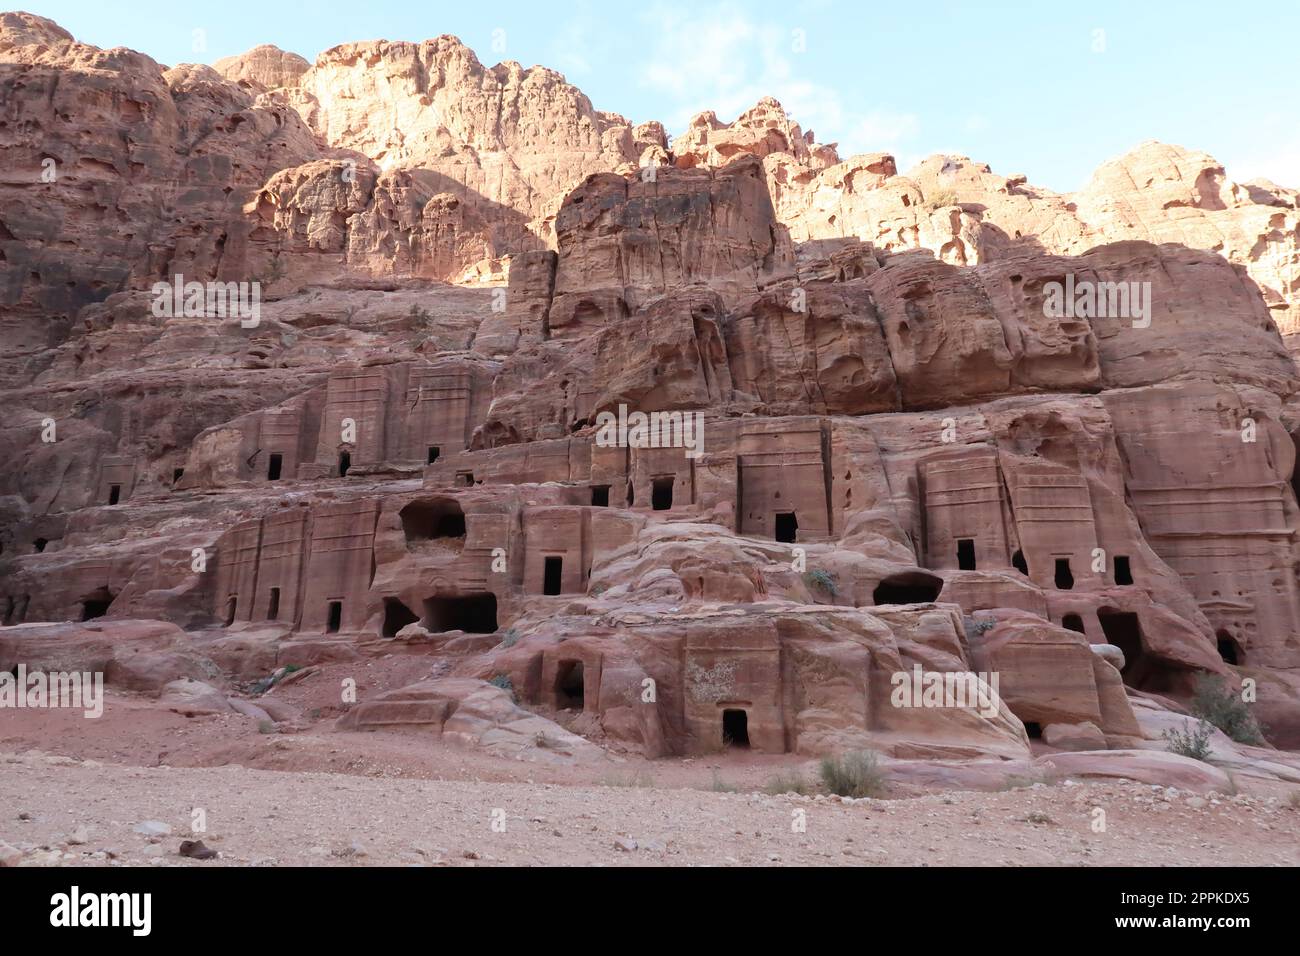 Walking along the street of facades in the ancien nabataean city of Petra Stock Photo